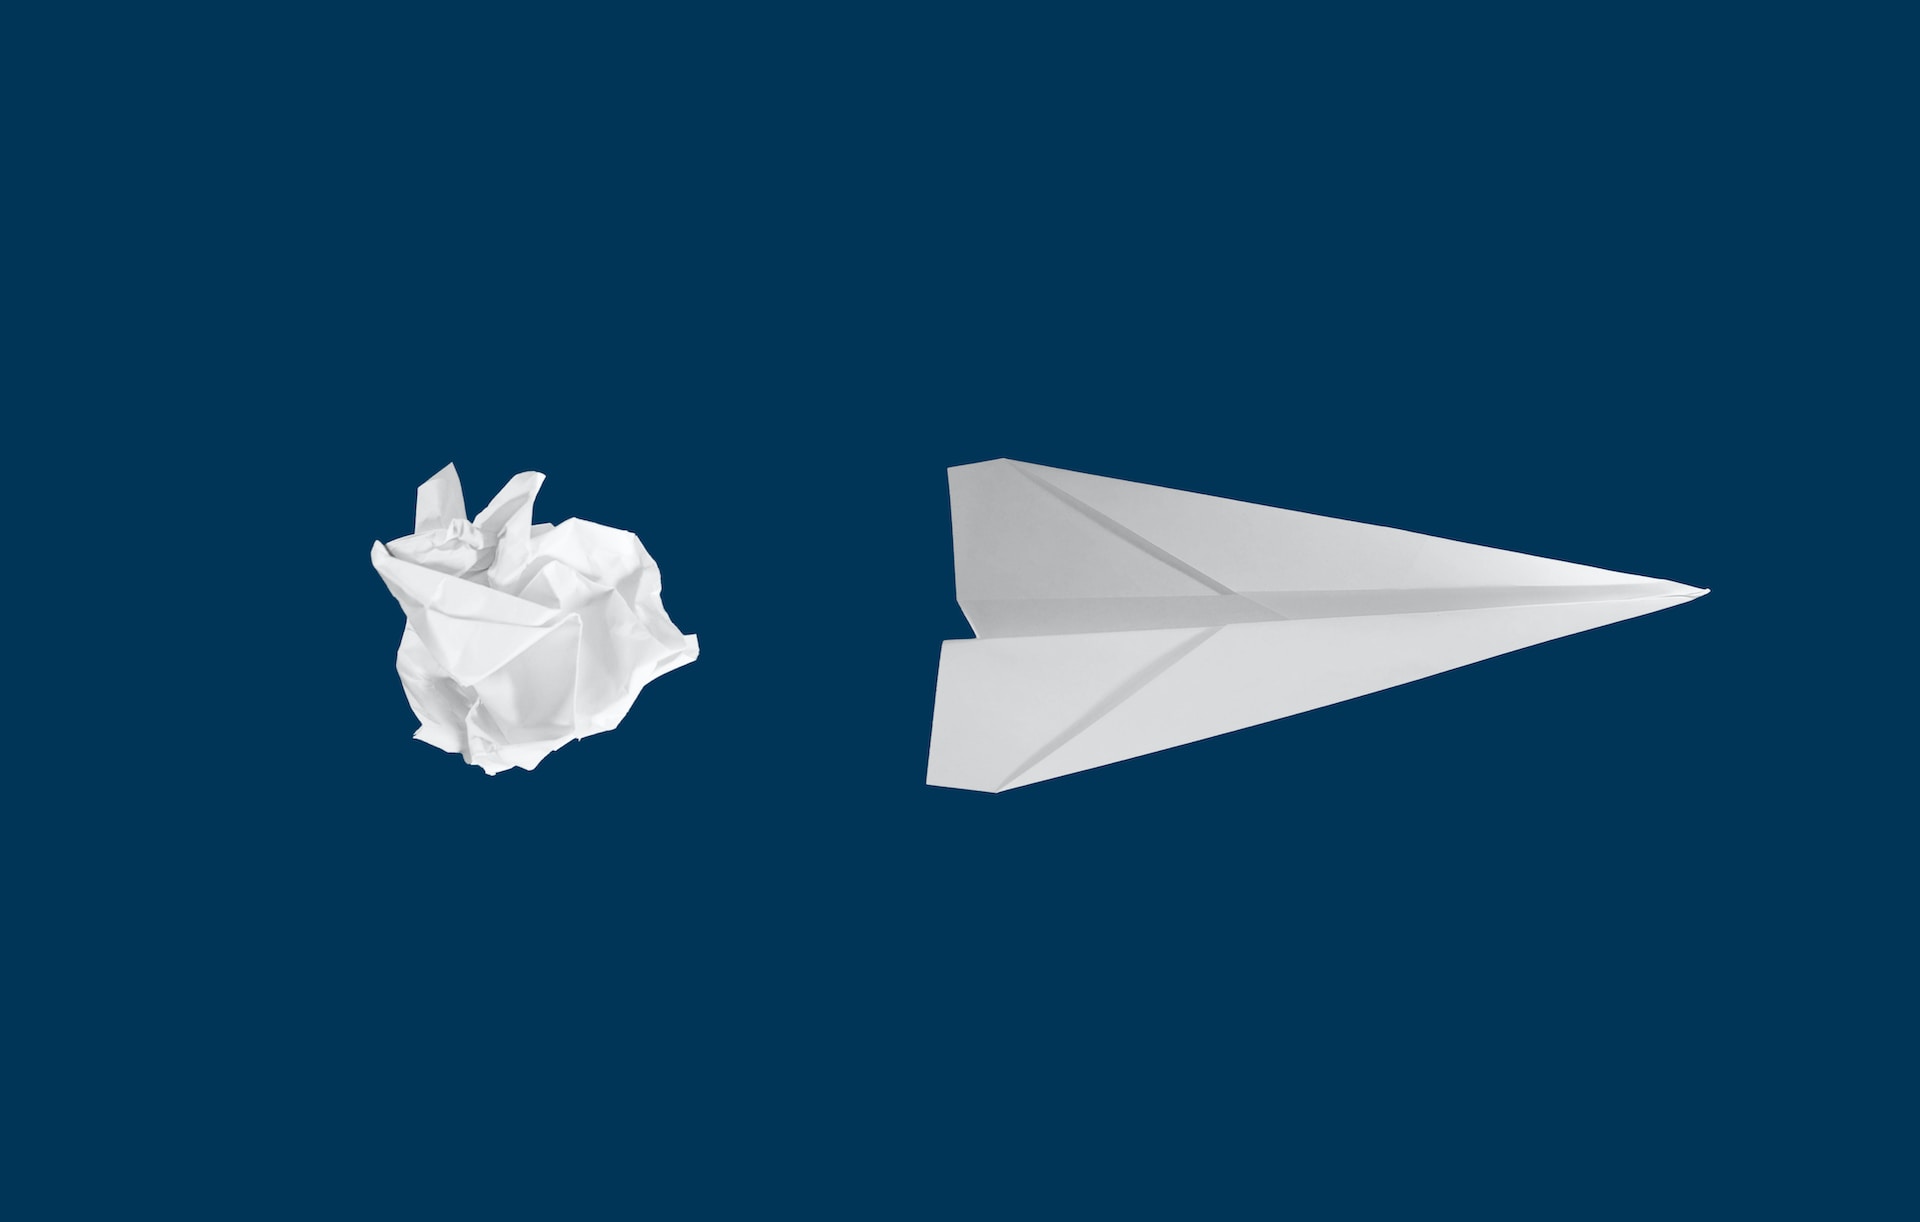 Crumpled paper next to a paper airplane illustrates the concept of CMS's new AHEAD model.